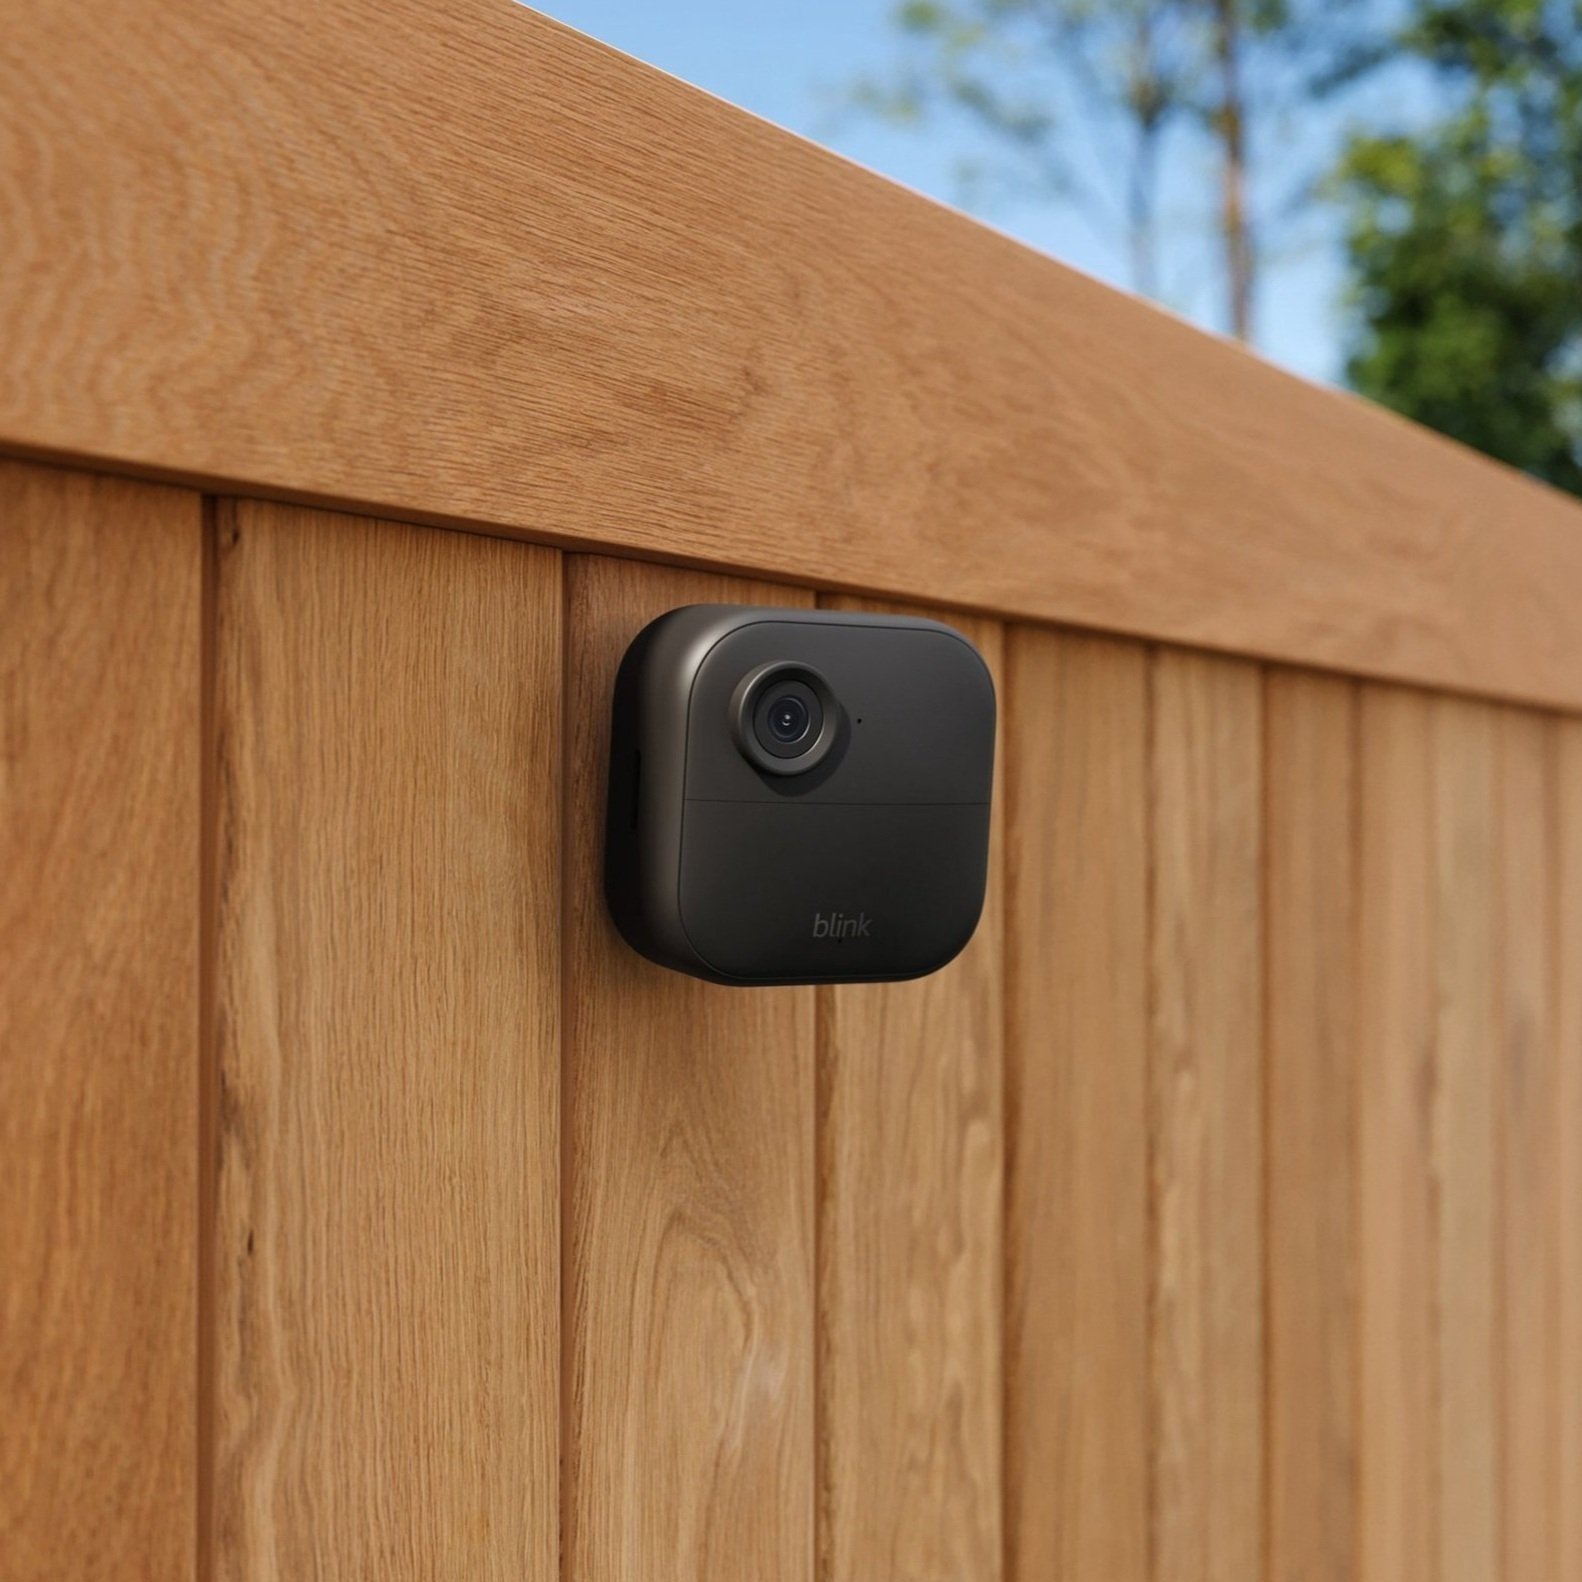 Best home security deal: Save 68% on the Blink video doorbell and 2 Blink  outdoor security cameras